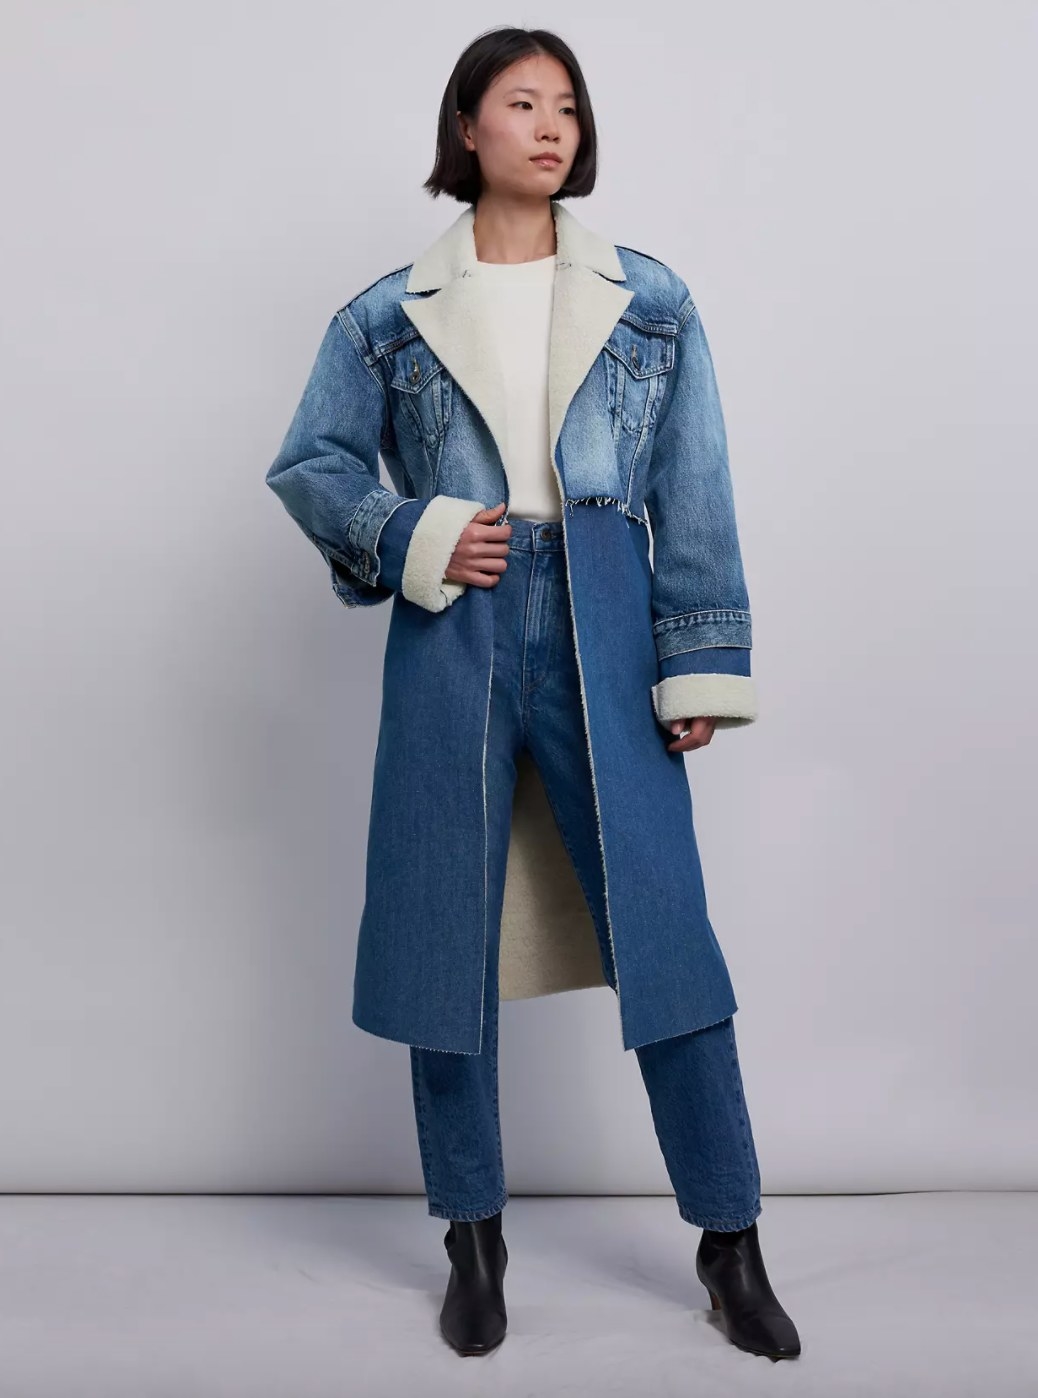 The long arctic overcoat in denim and sherpa